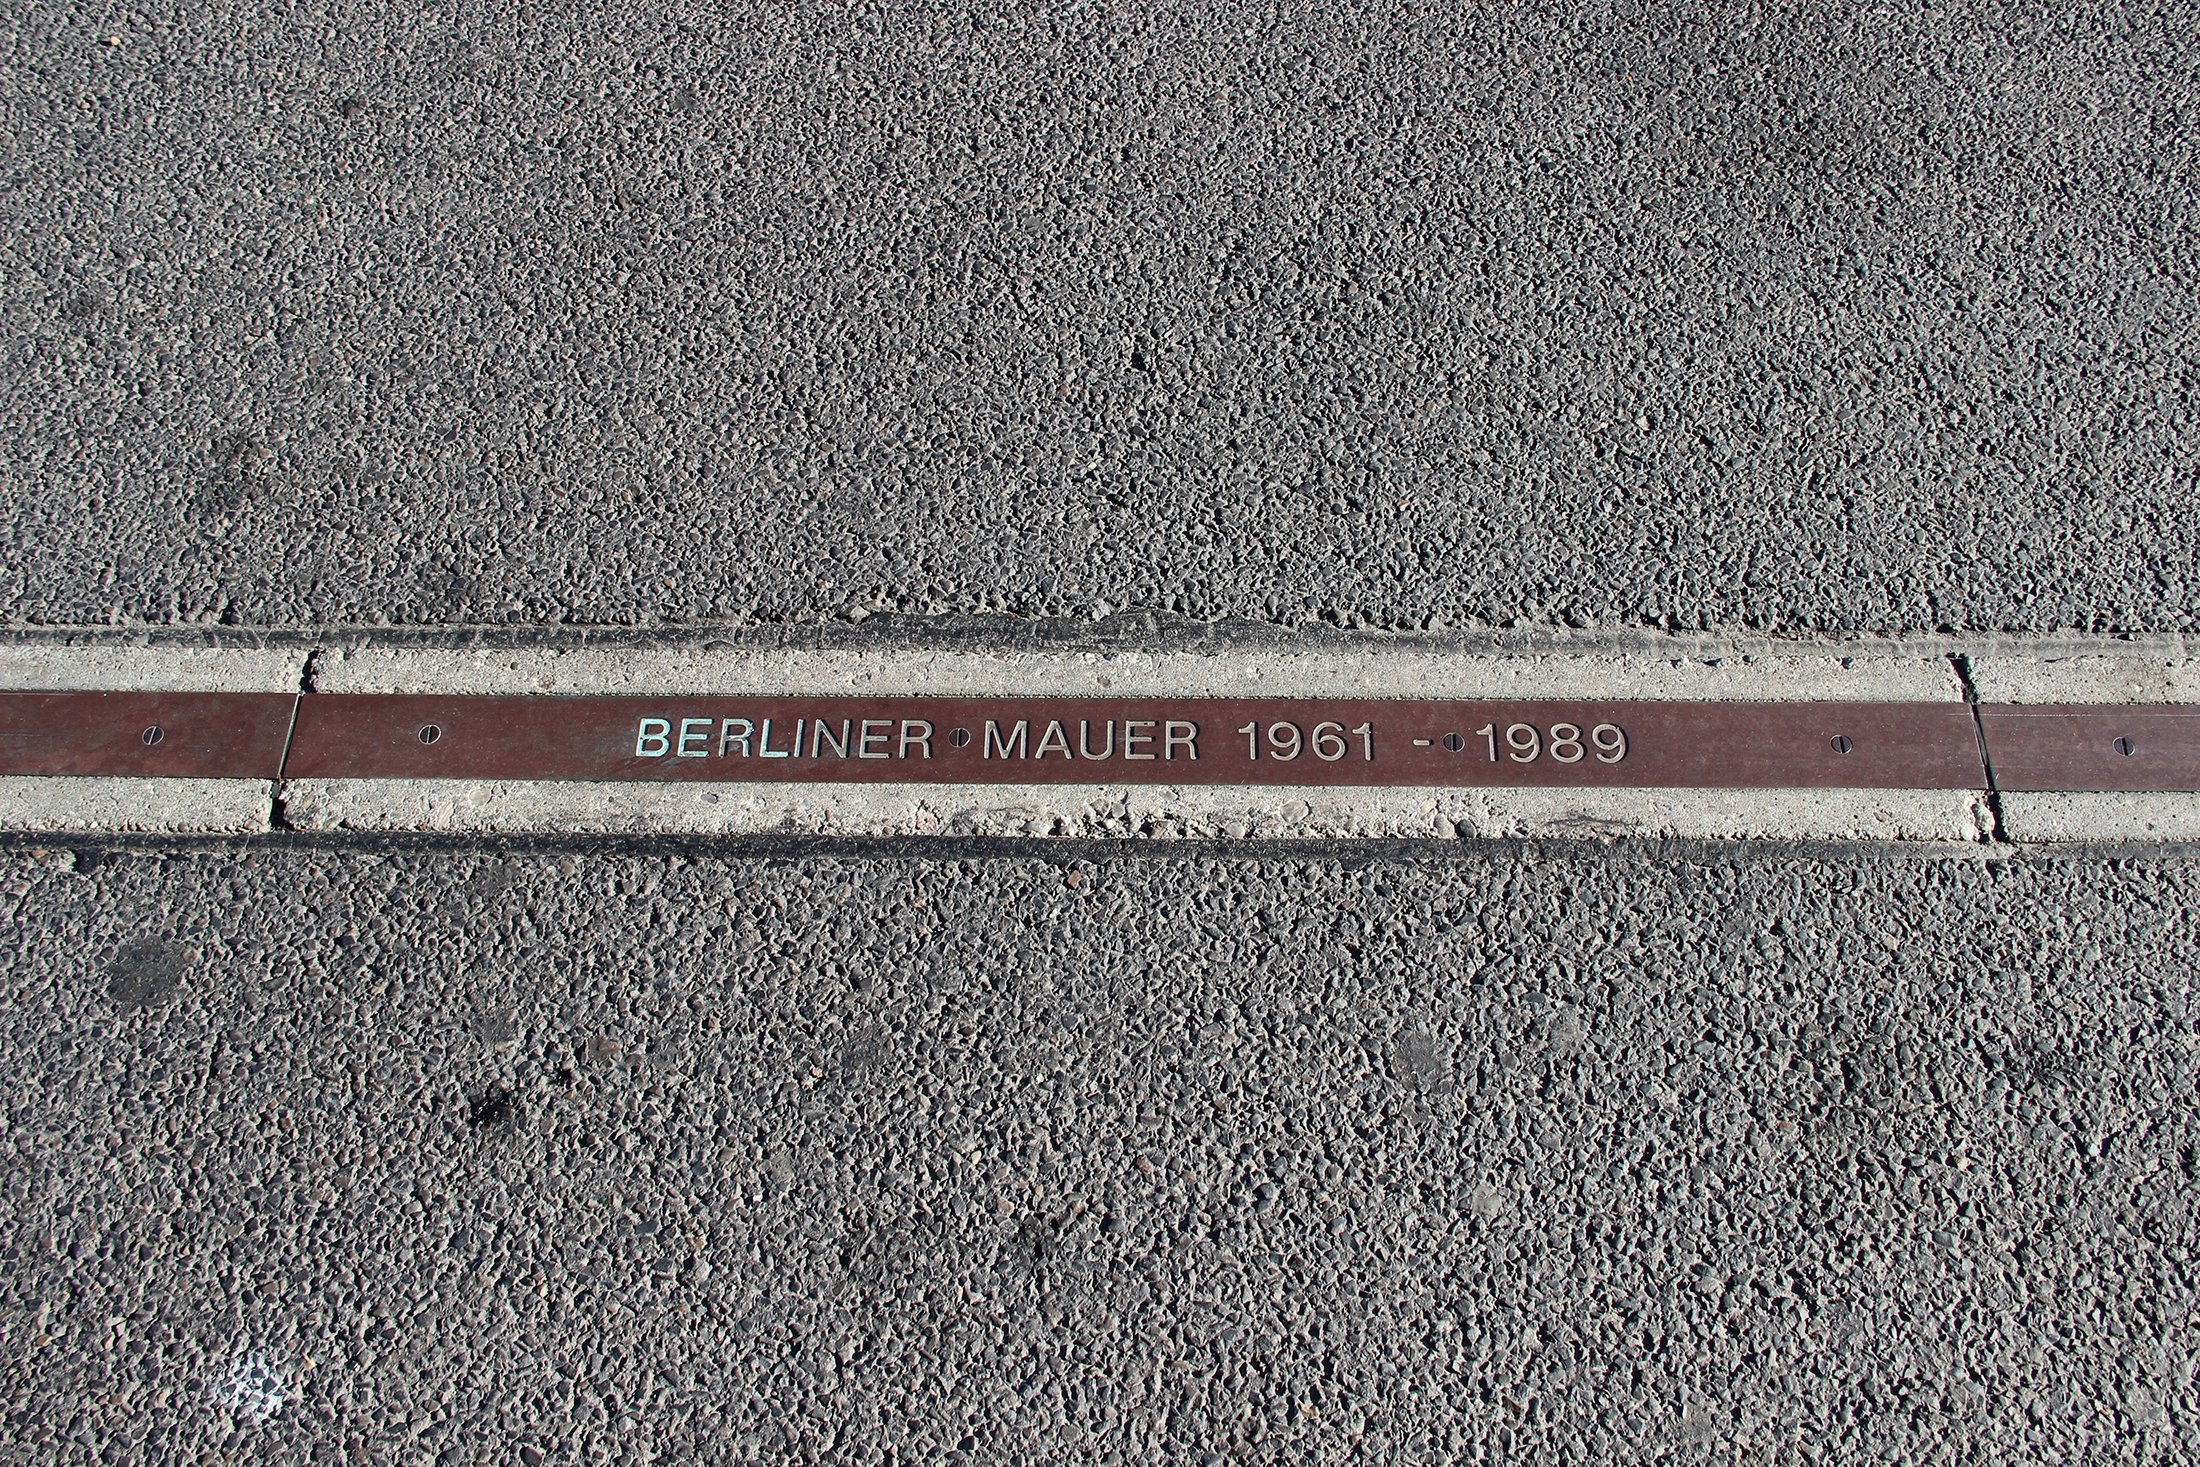 The writing, “Berliner Mauer 1961-1989” (Berlin Wall 1961-1989) marks the remains of the Berlin Wall, Berlin, Germany. (Shutterstock Photo)